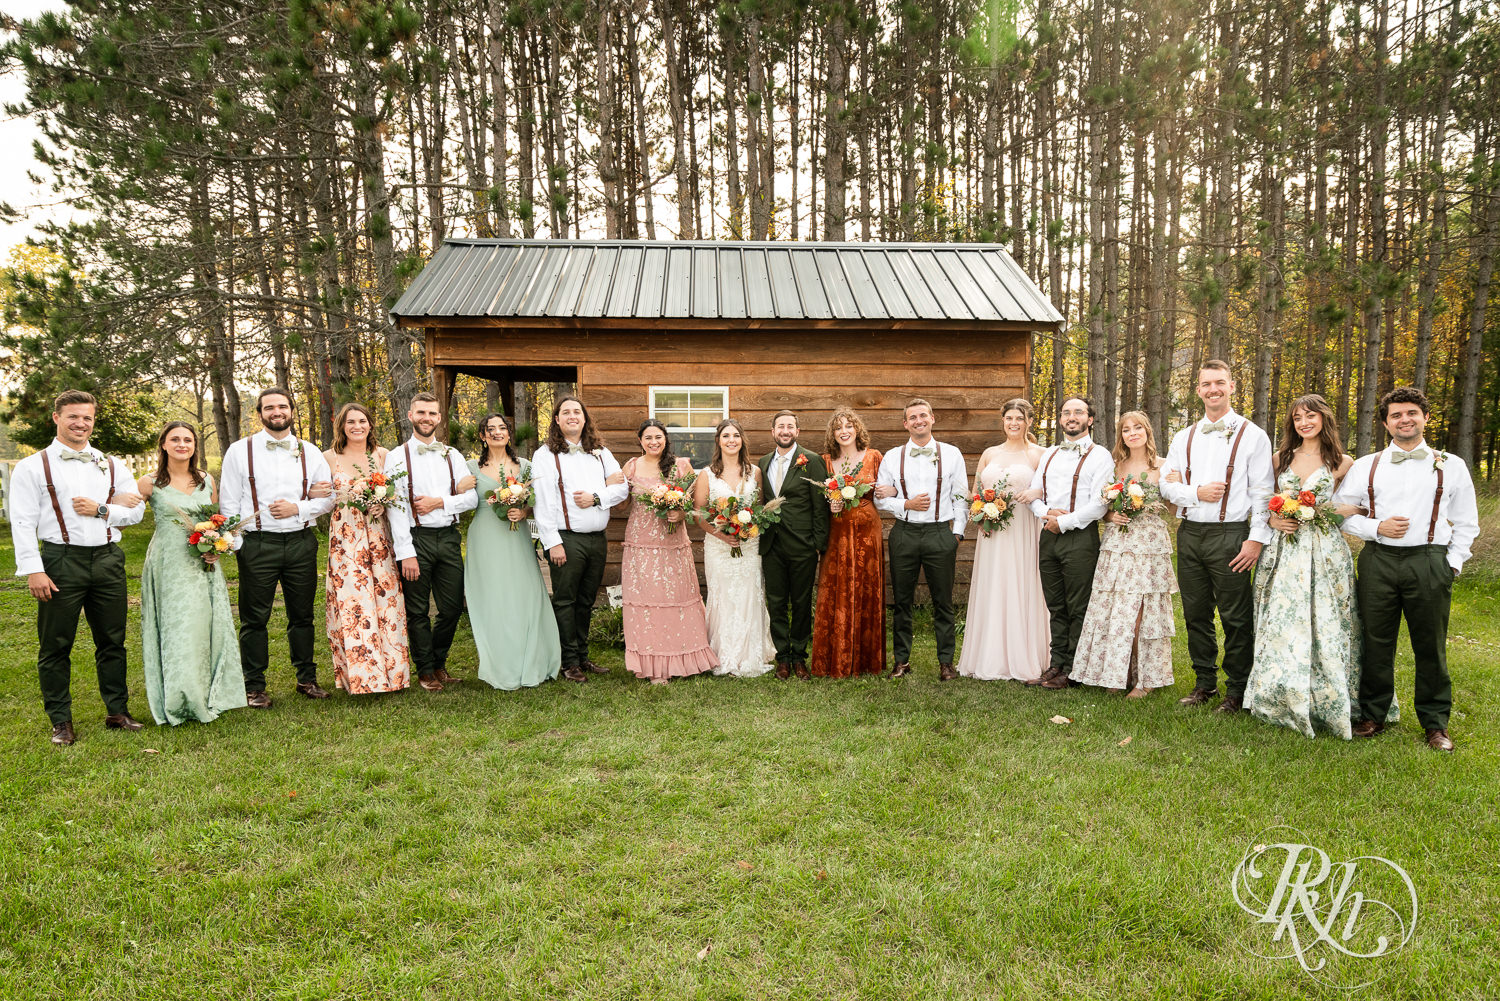 Bride and groom smile with wedding party on wedding day at Hayvn at Hay River in Boyceville, Wisconsin. 